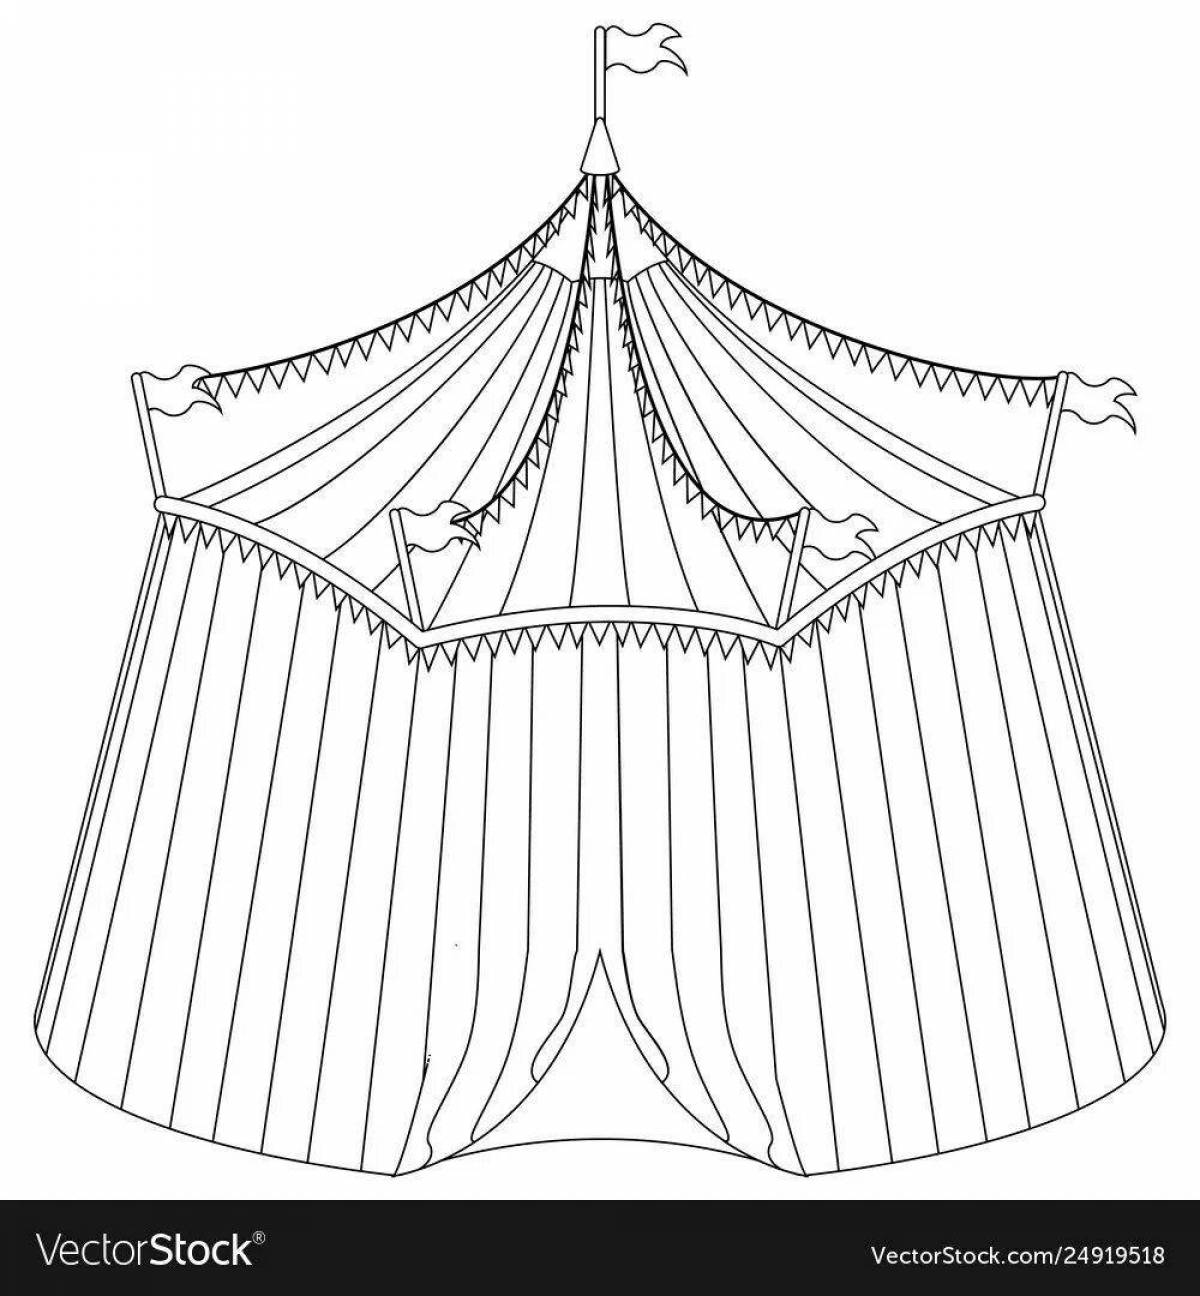 Adorable circus tent coloring page